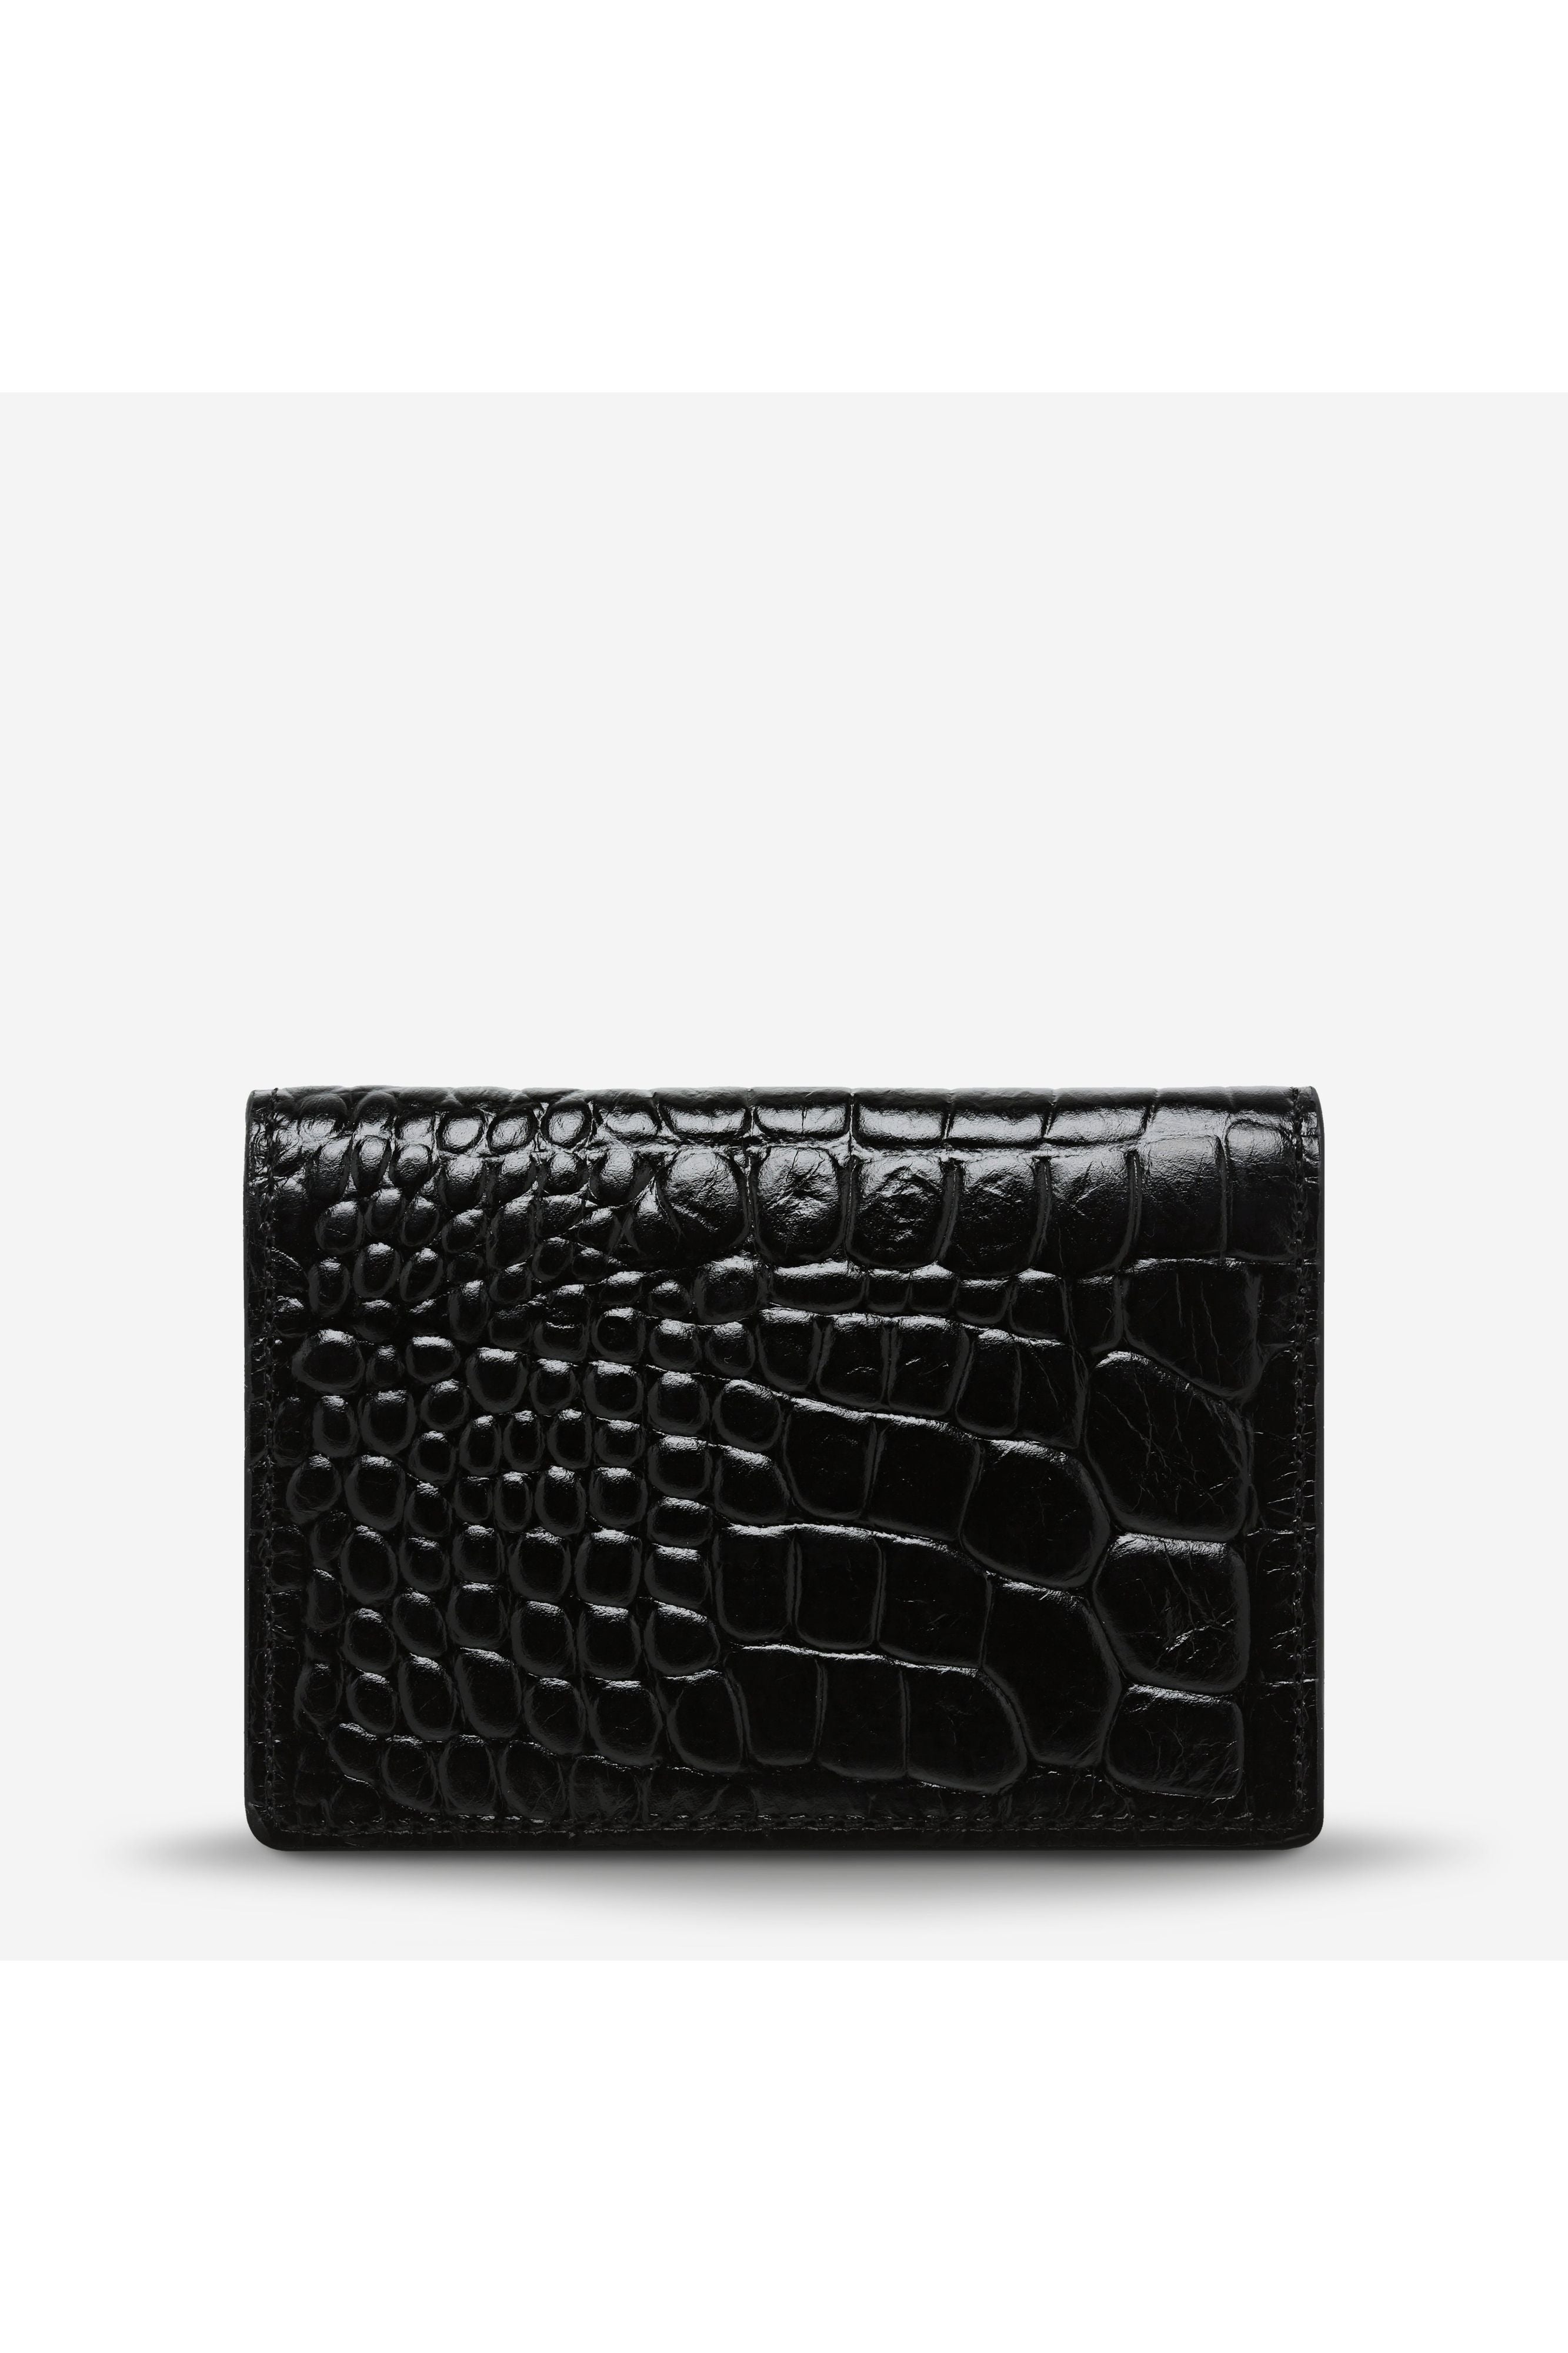 Status Anxiety - Easy Does It - Black Croc Emboss